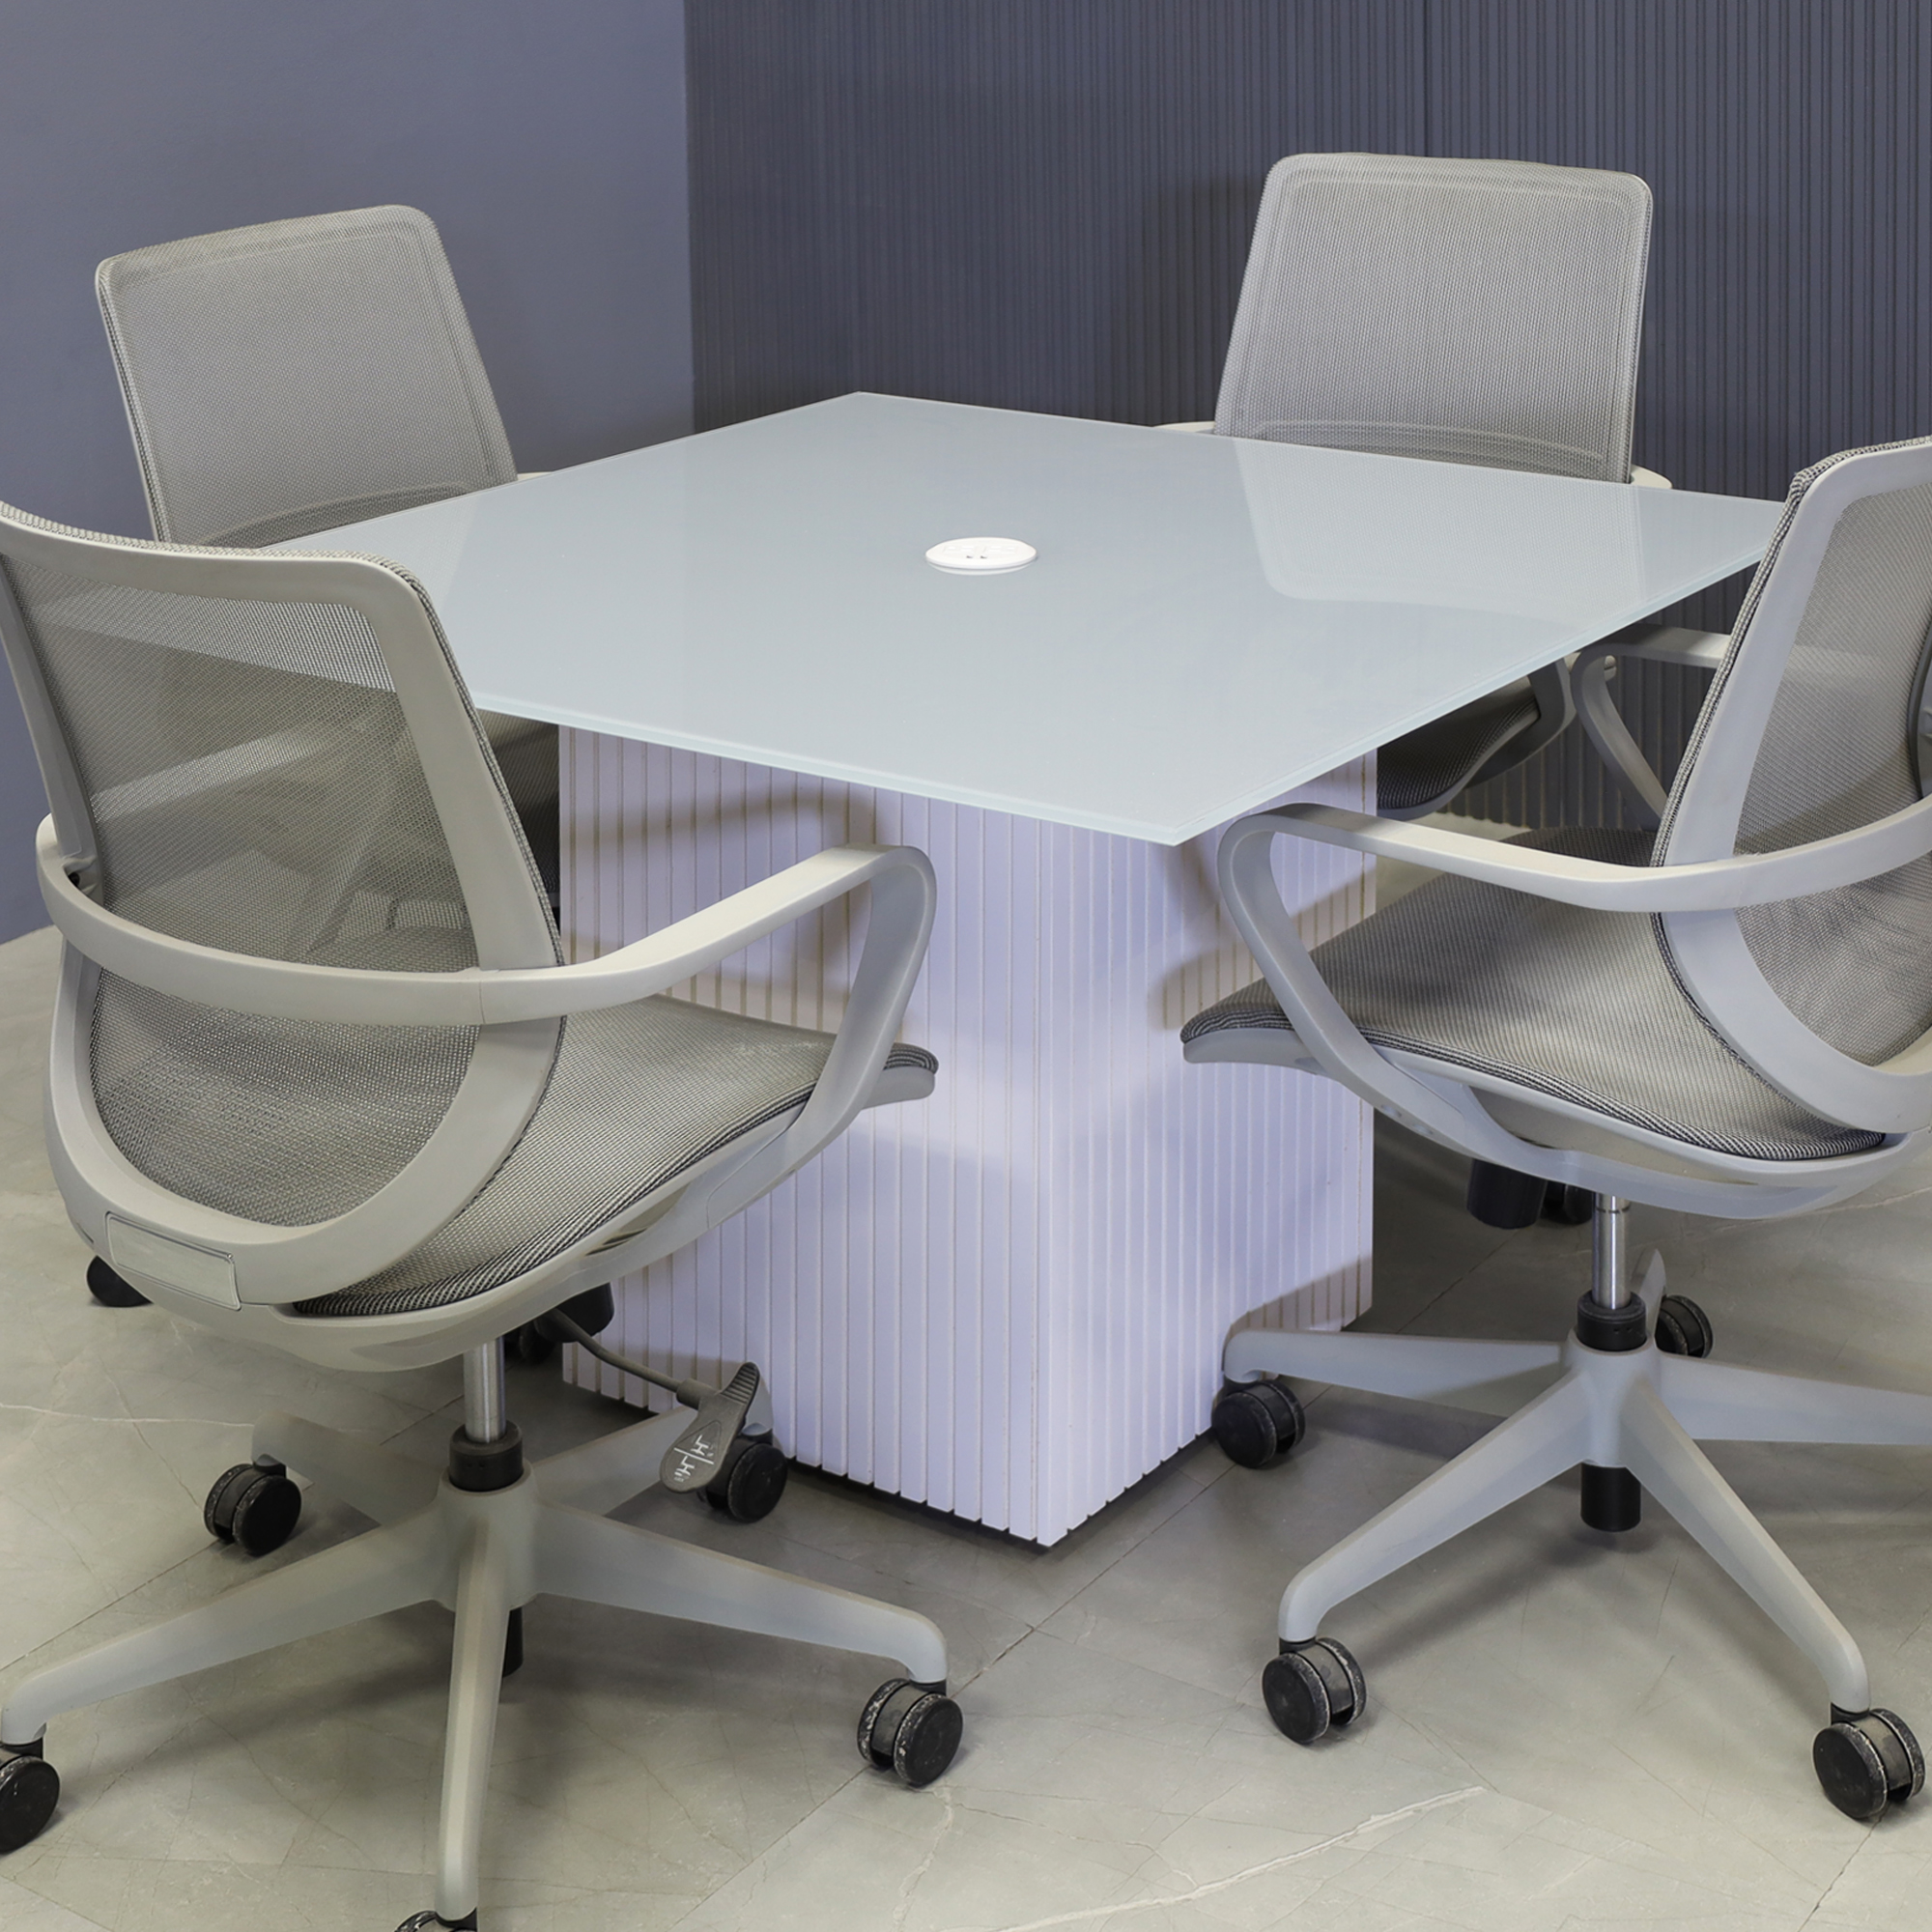 42-inch Omaha Square Shape Conference Table in 1/2